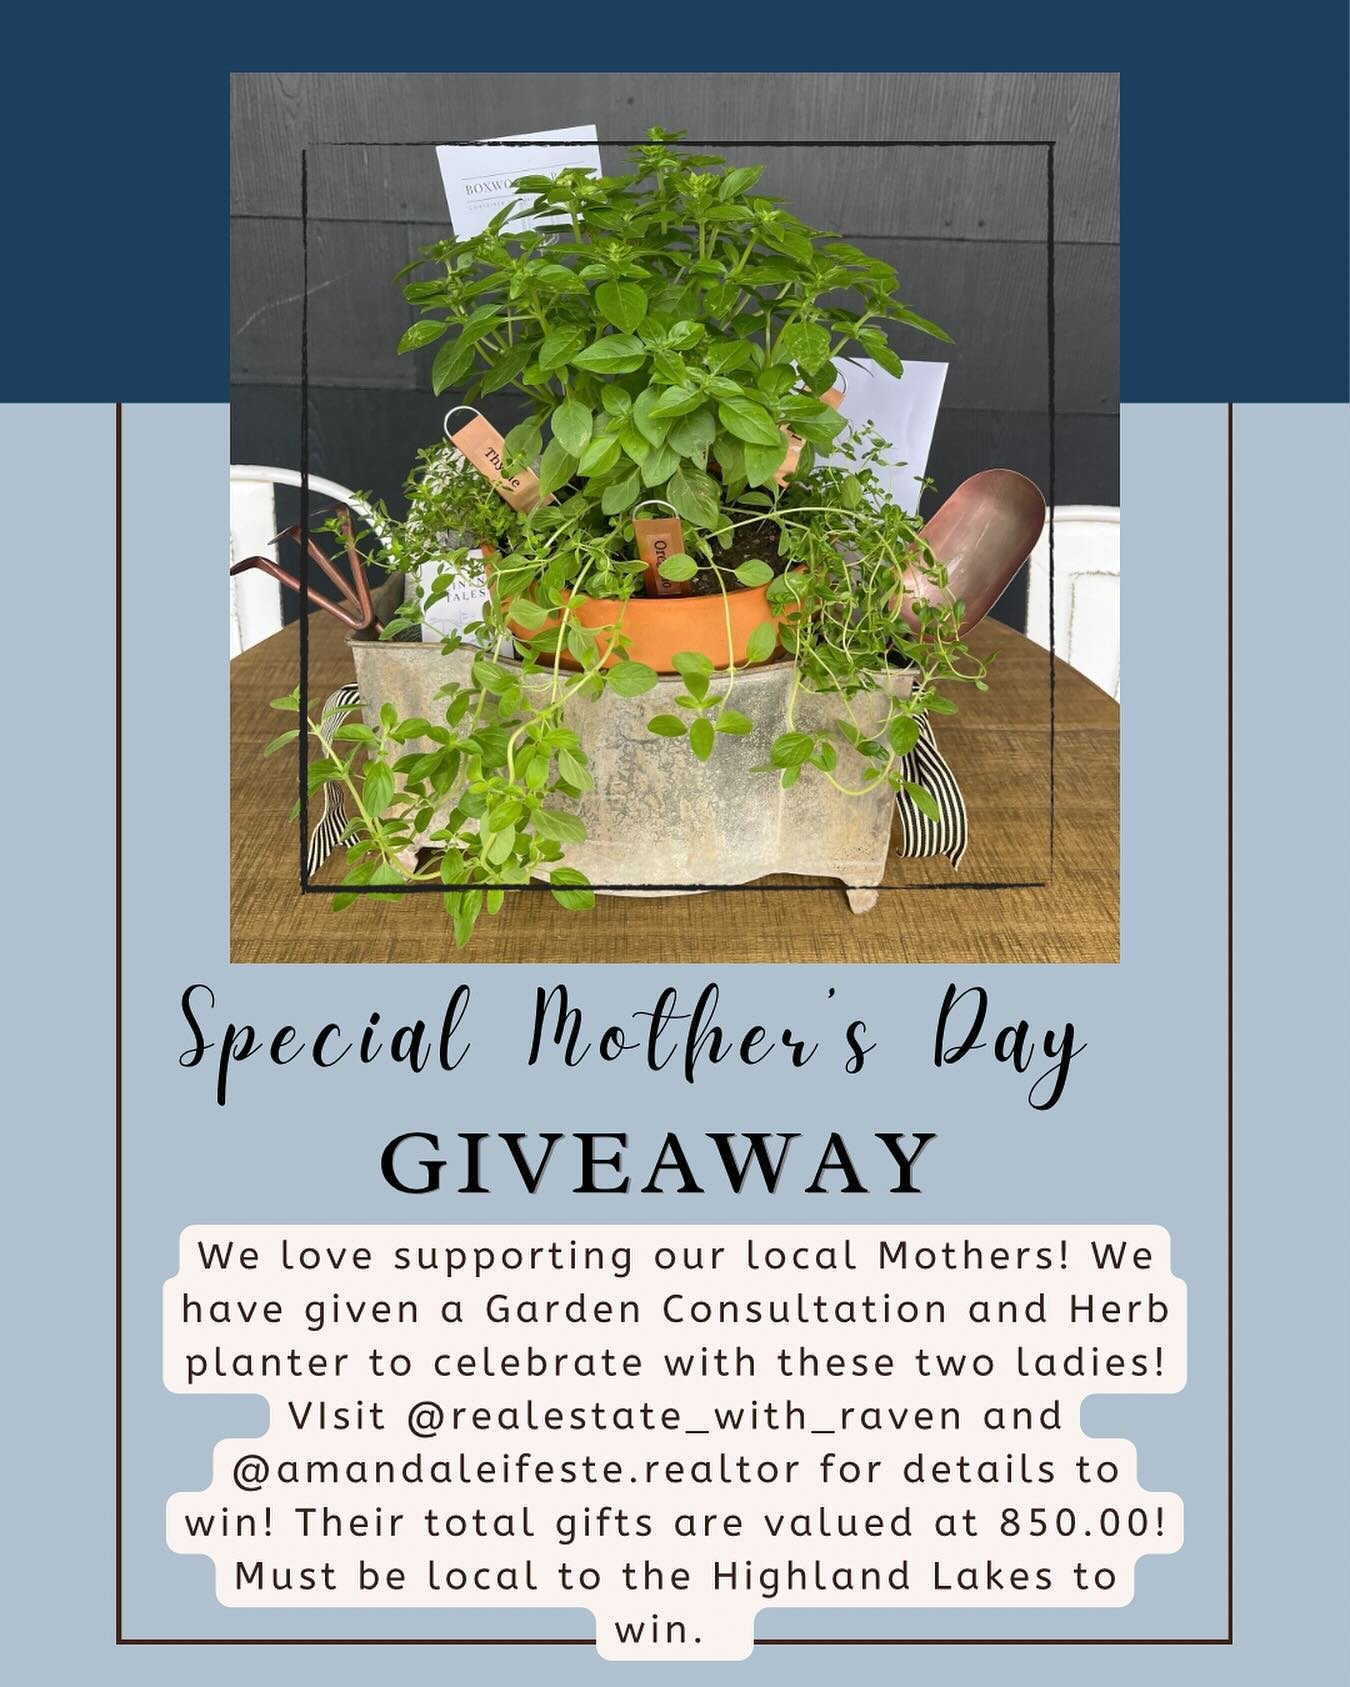 You know we love supporting our local businesses! We are honored to contribute a Garden Consultation and Herb planter to the Mother&rsquo;s Day Giveaway by @realestate_with_raven  and @amandaleifeste.realtor. Head to their accounts for details to win